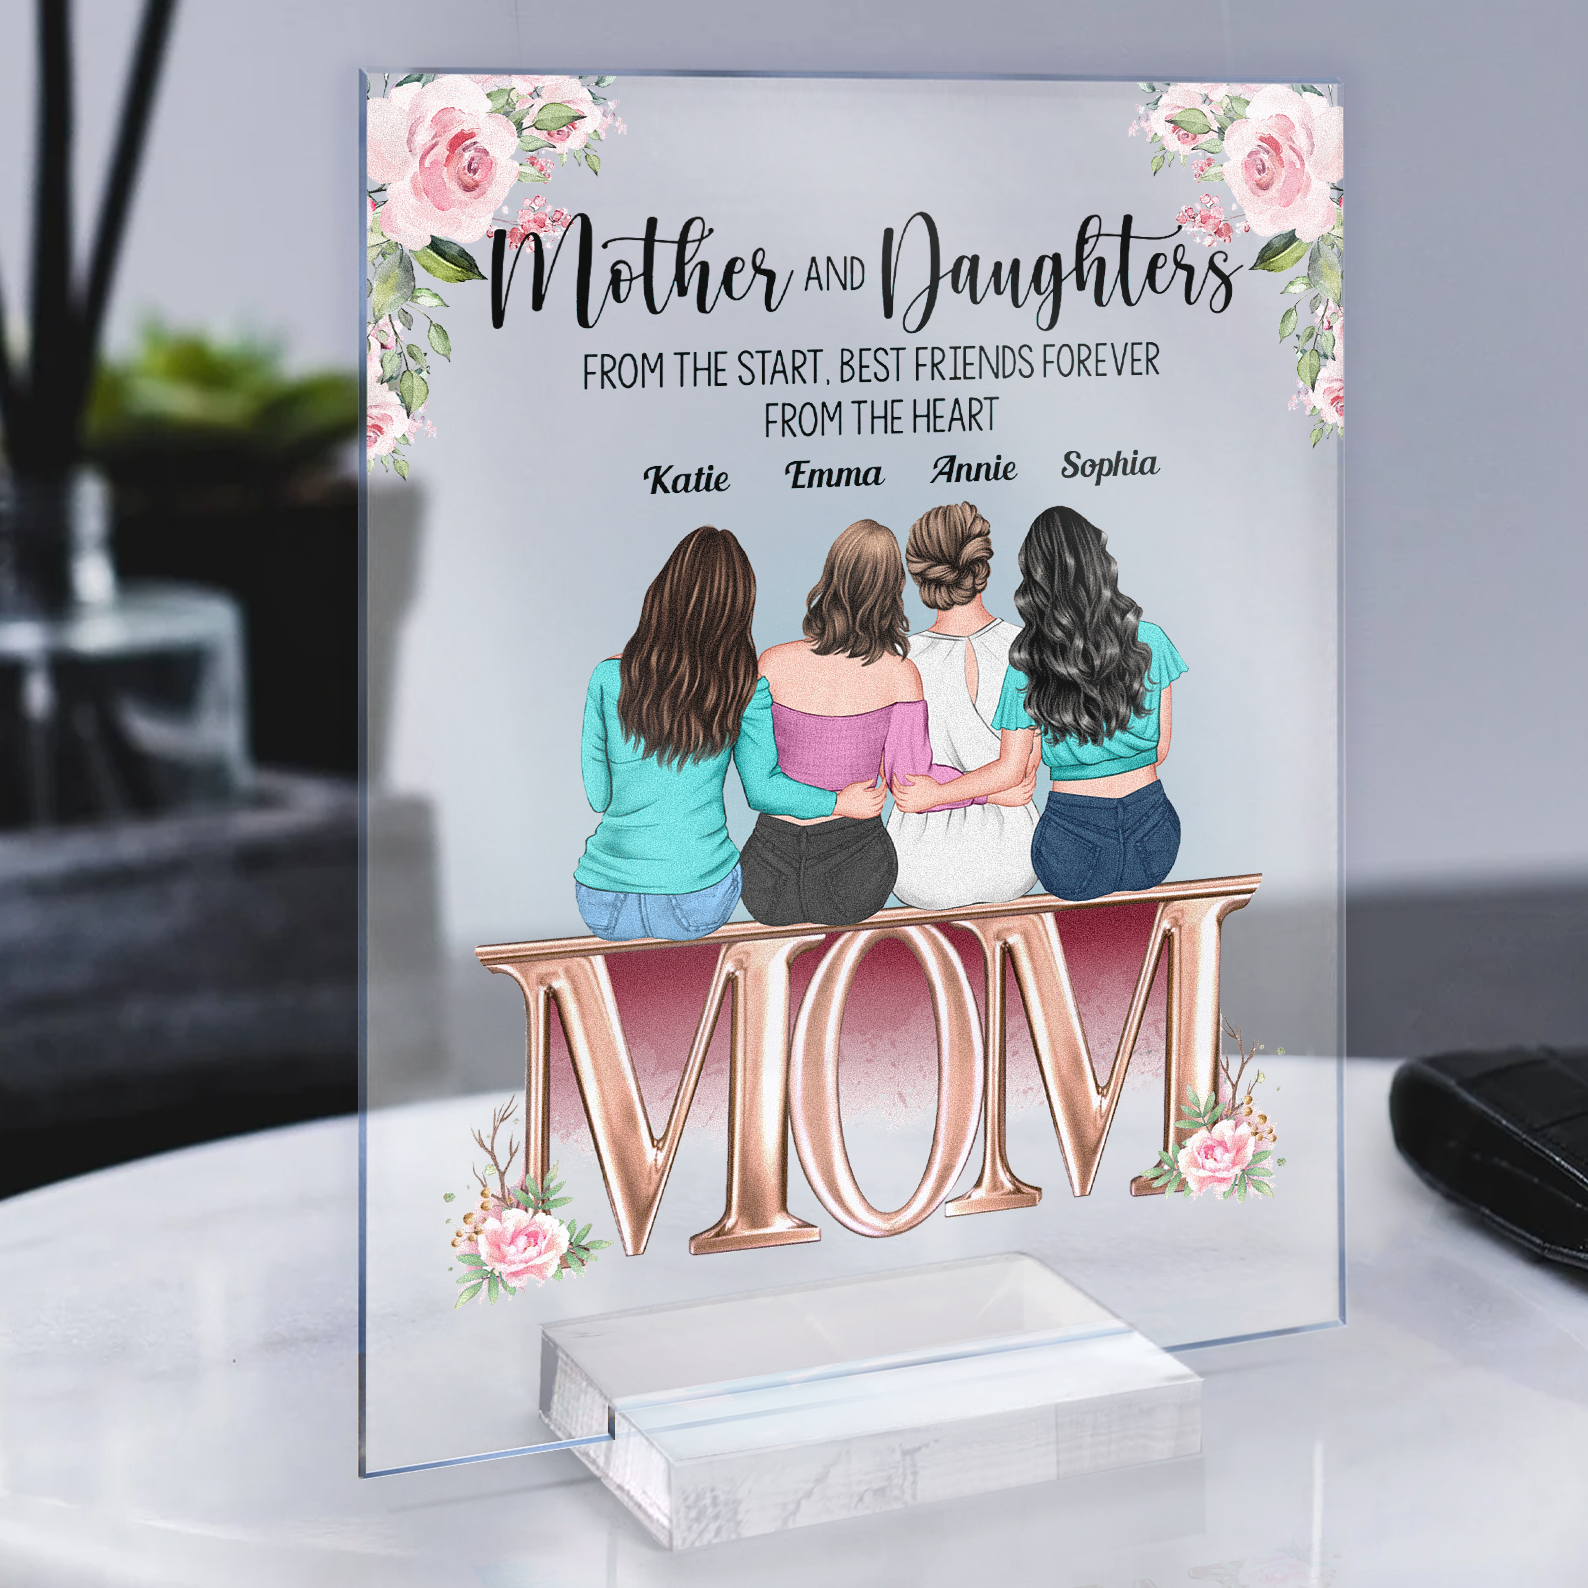 Mother's Day Gifts — Not Another Bunch Of Flowers